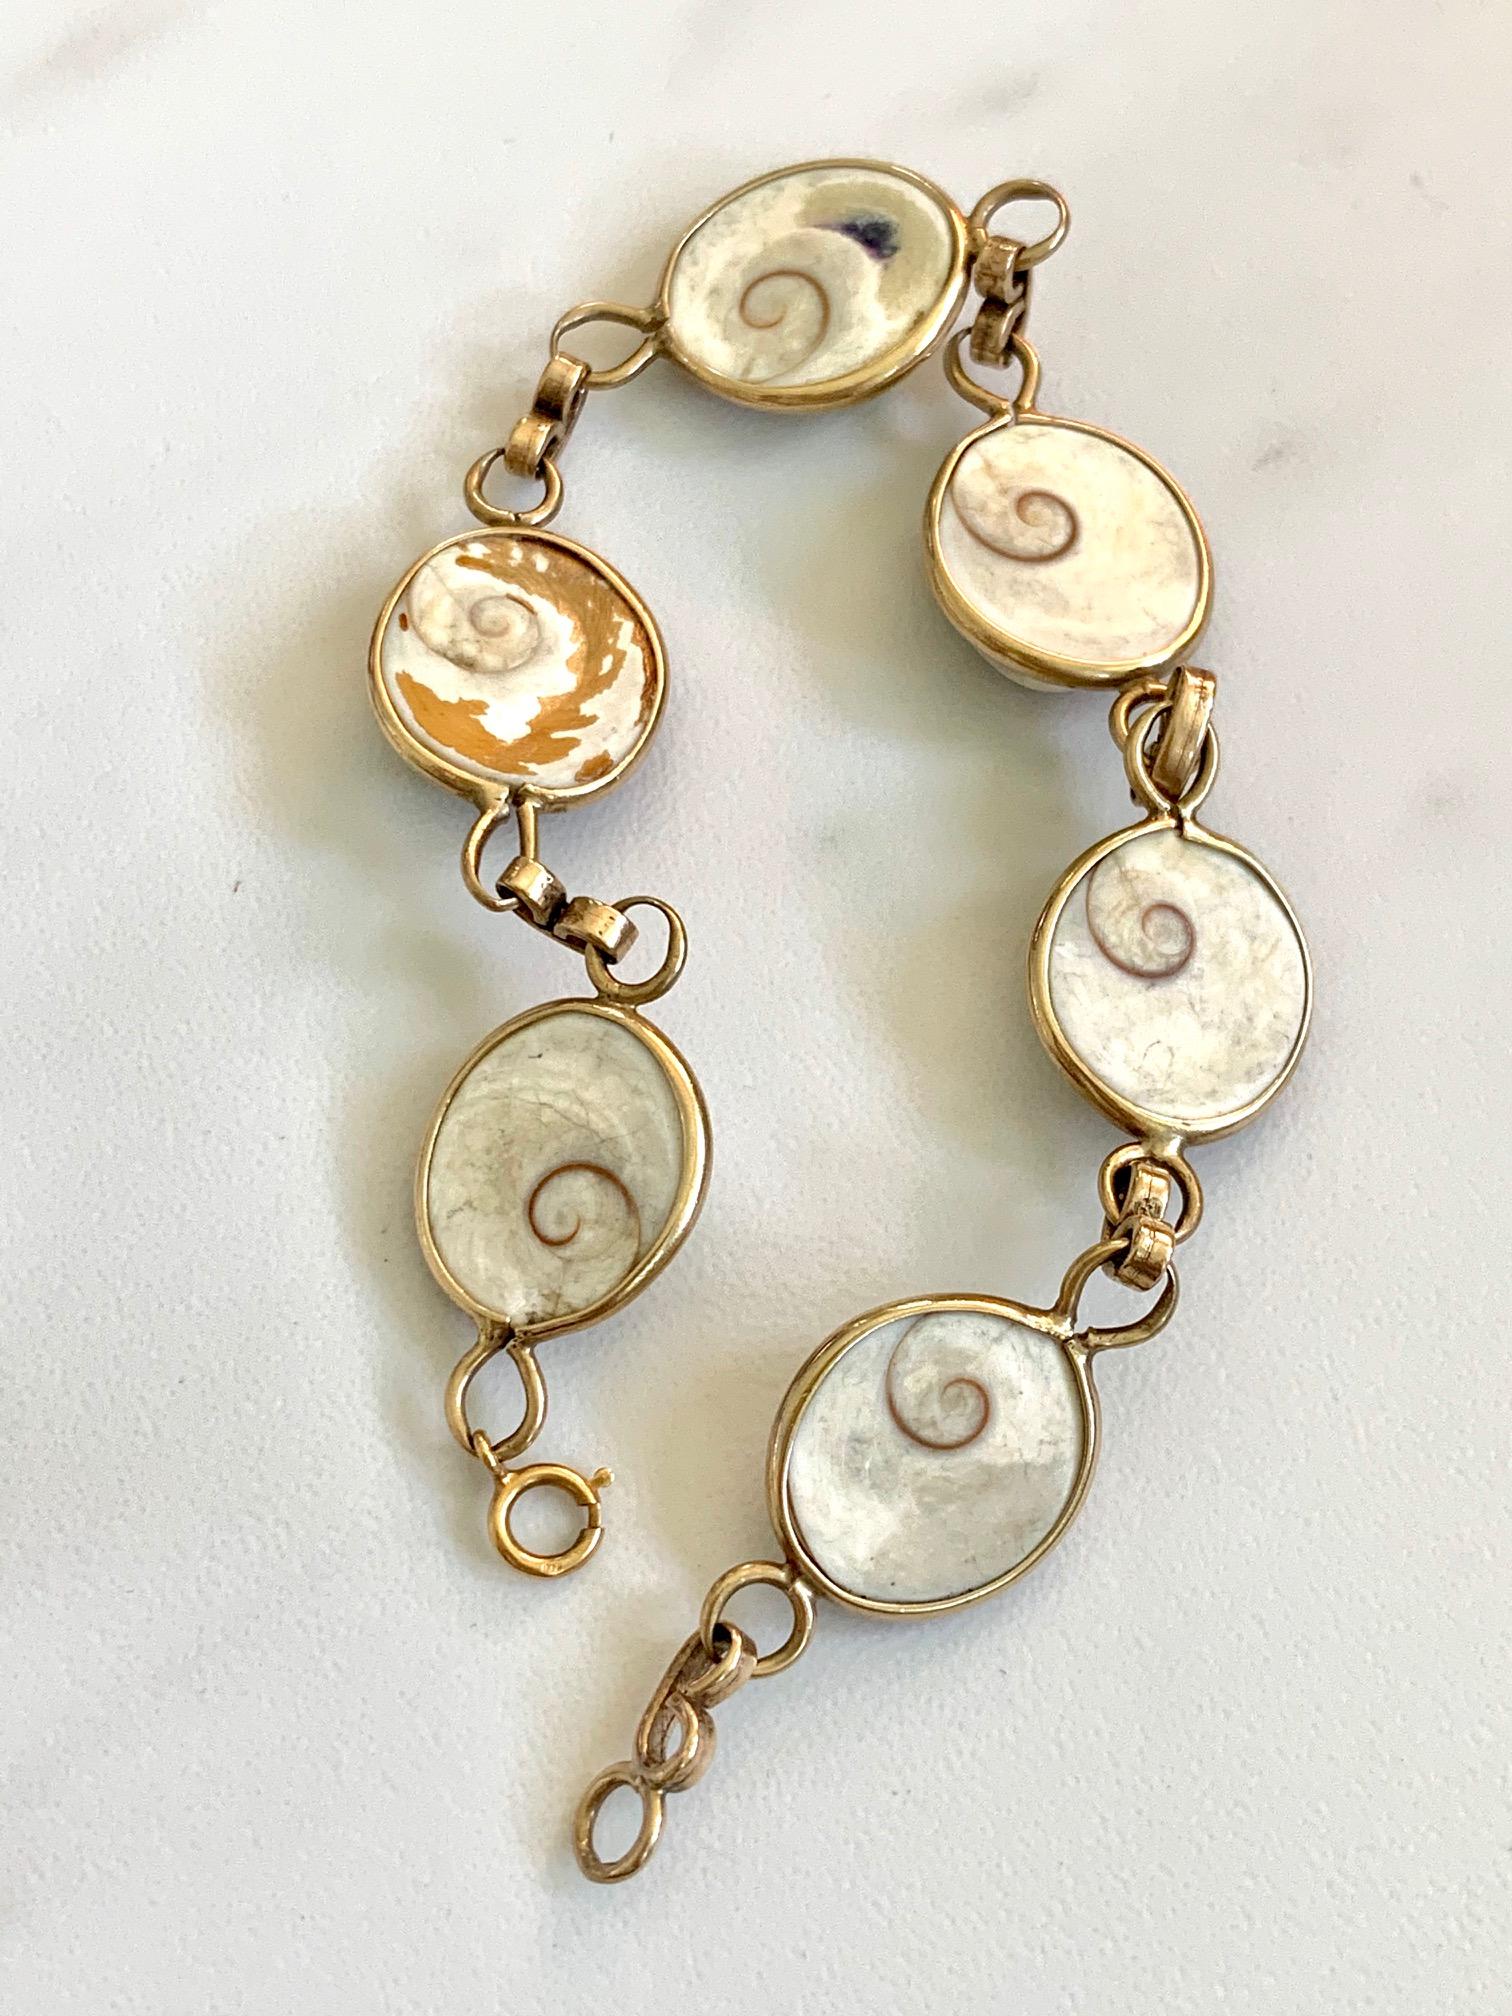 Antique Cat's Eye Operculum Snail 14 Karat Yellow Gold Bracelet and Earrings In Good Condition For Sale In St. Louis Park, MN